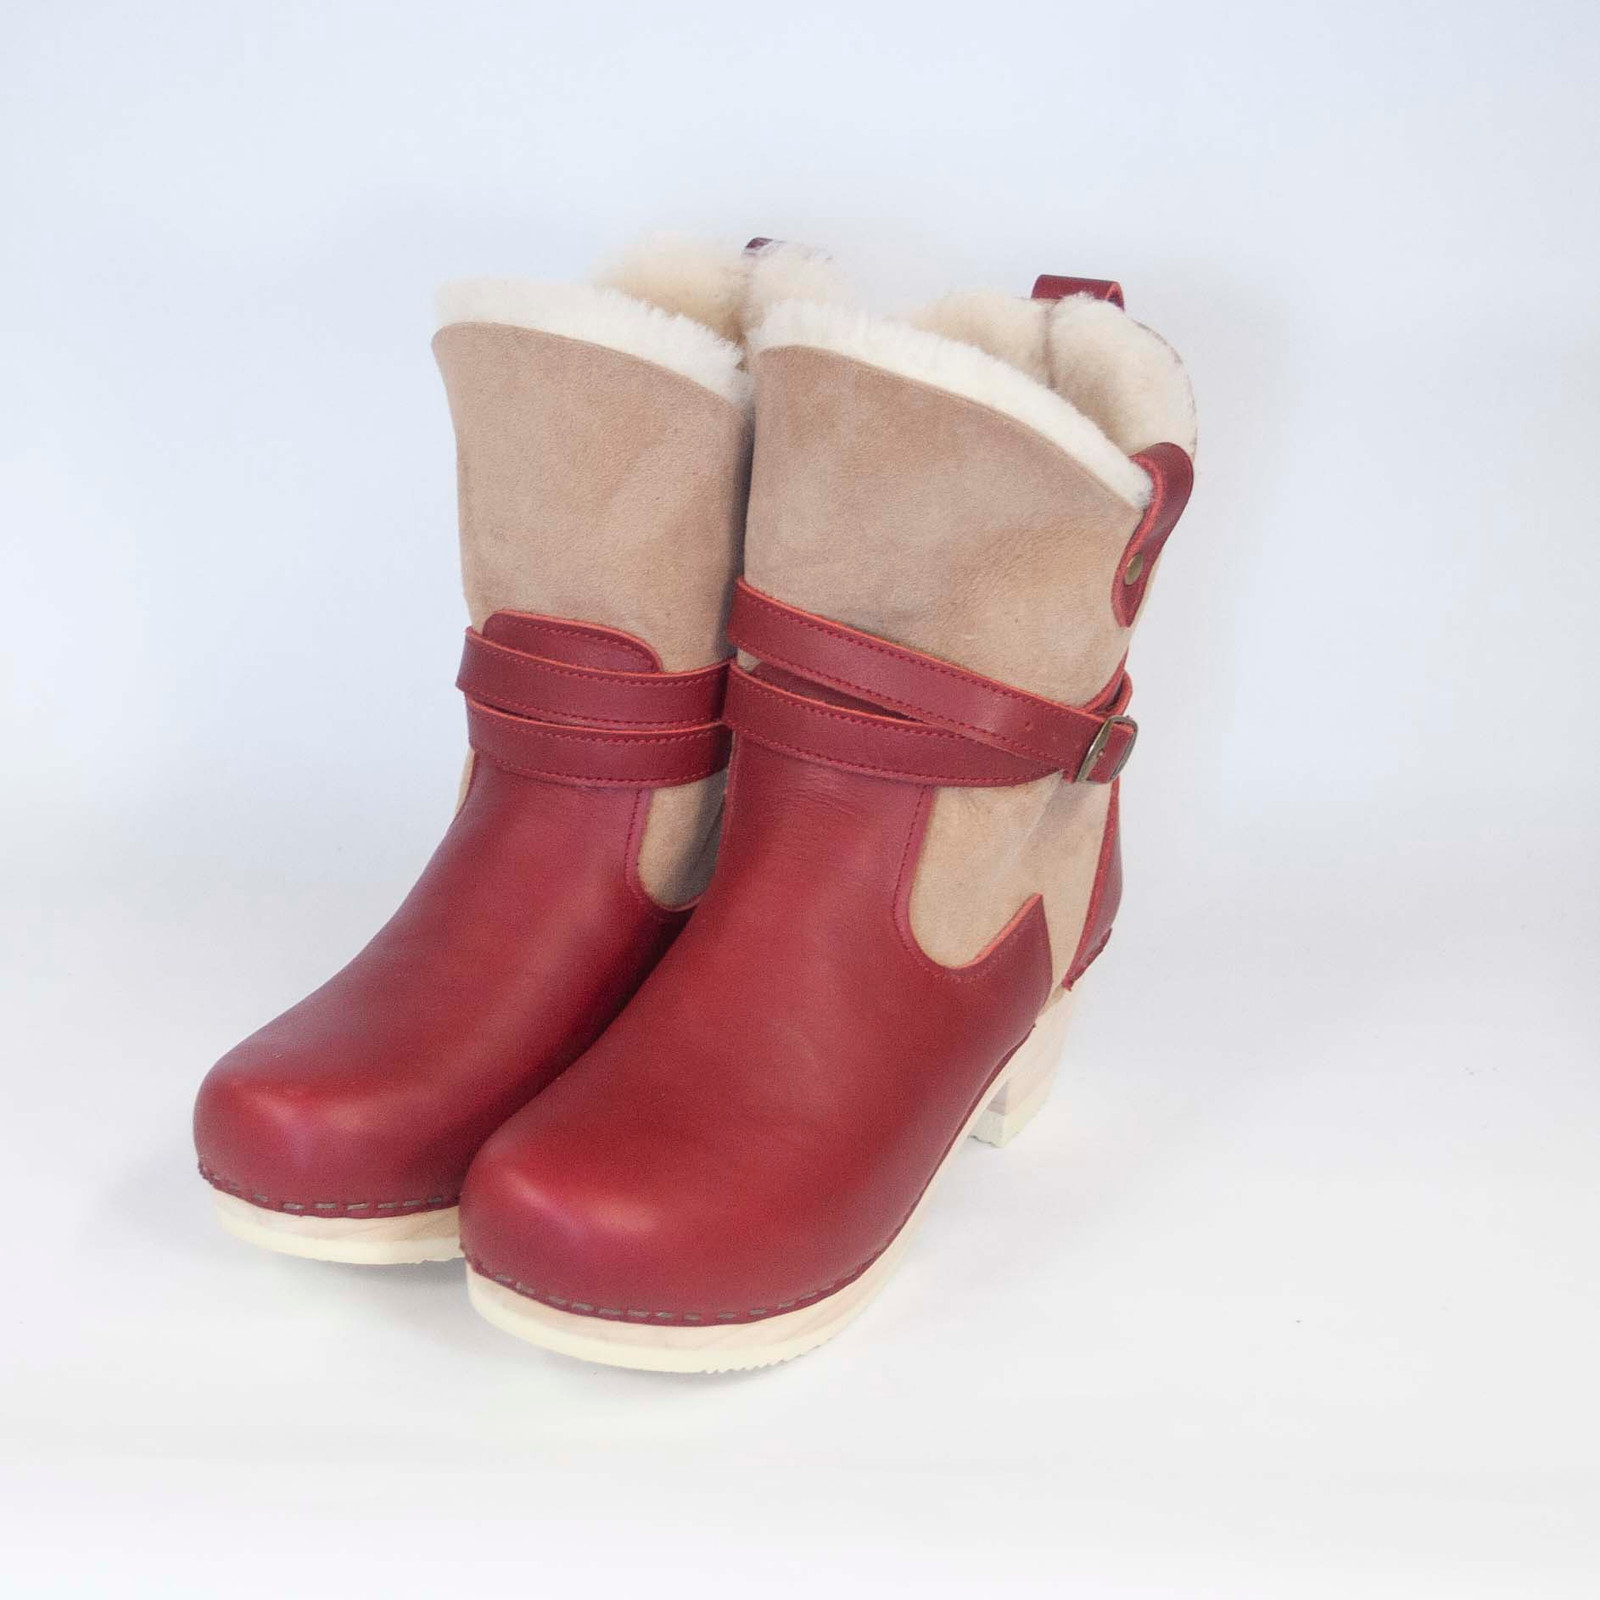 Lucy Cream -Cranberry  7" Clog Booties